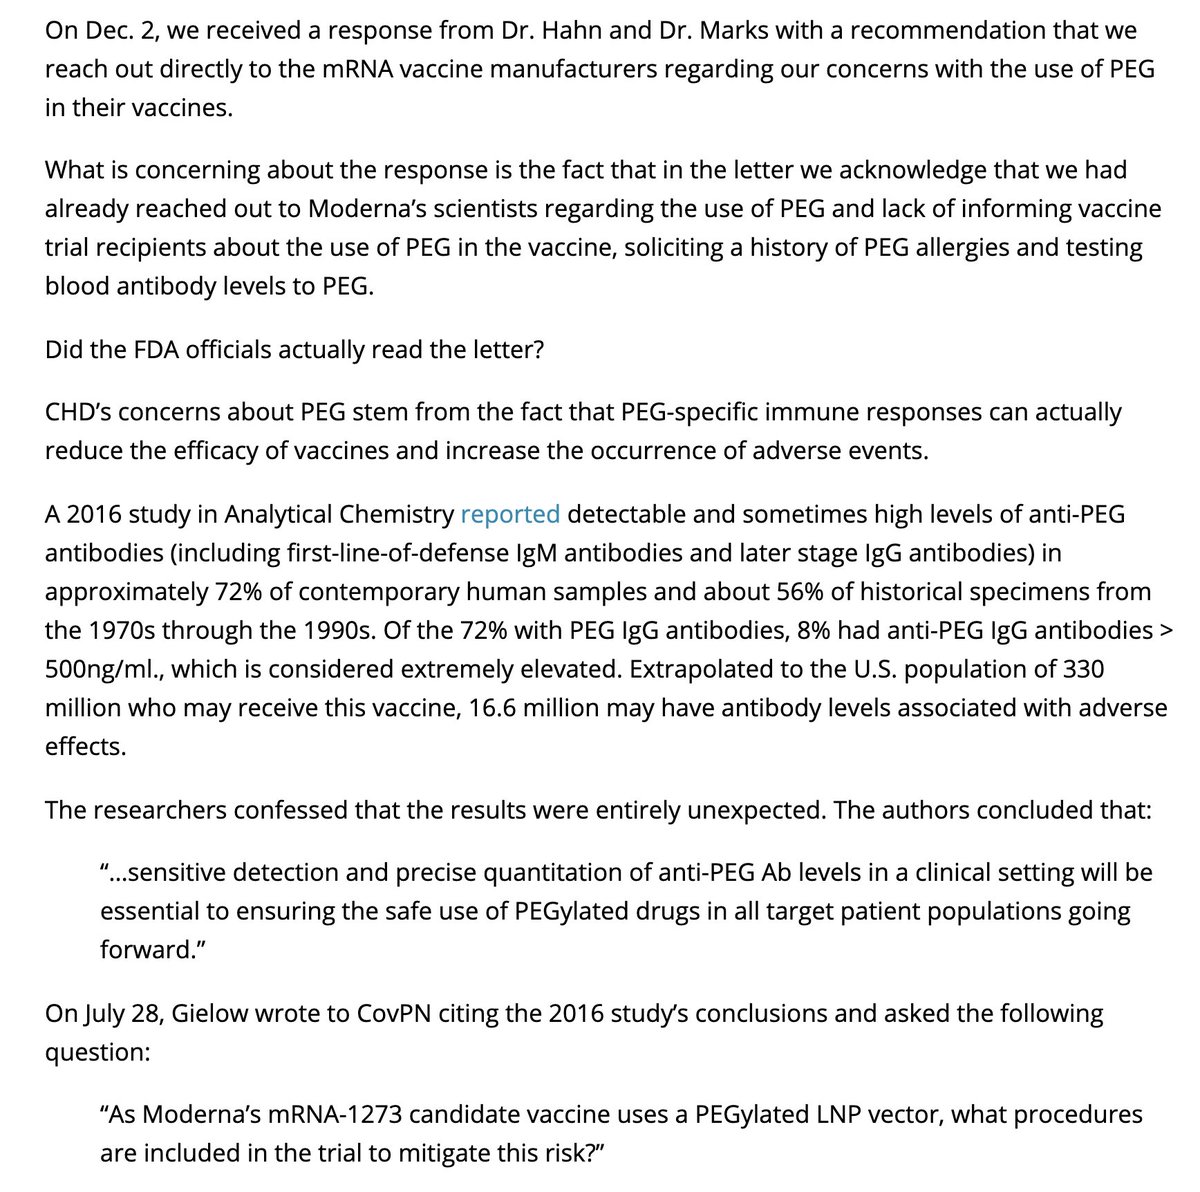 The  @ChildrensHD sent multiple letters to HHS/FDA re PEG additive in COVID vaccines. Govt brushed them off."Extrapolated to the U.S. population of 330 million, 16.6 million may have antibody levels associated w/adverse effects." https://childrenshealthdefense.org/defender/pfizer-covid-vaccine-allergic-reactions/ /43